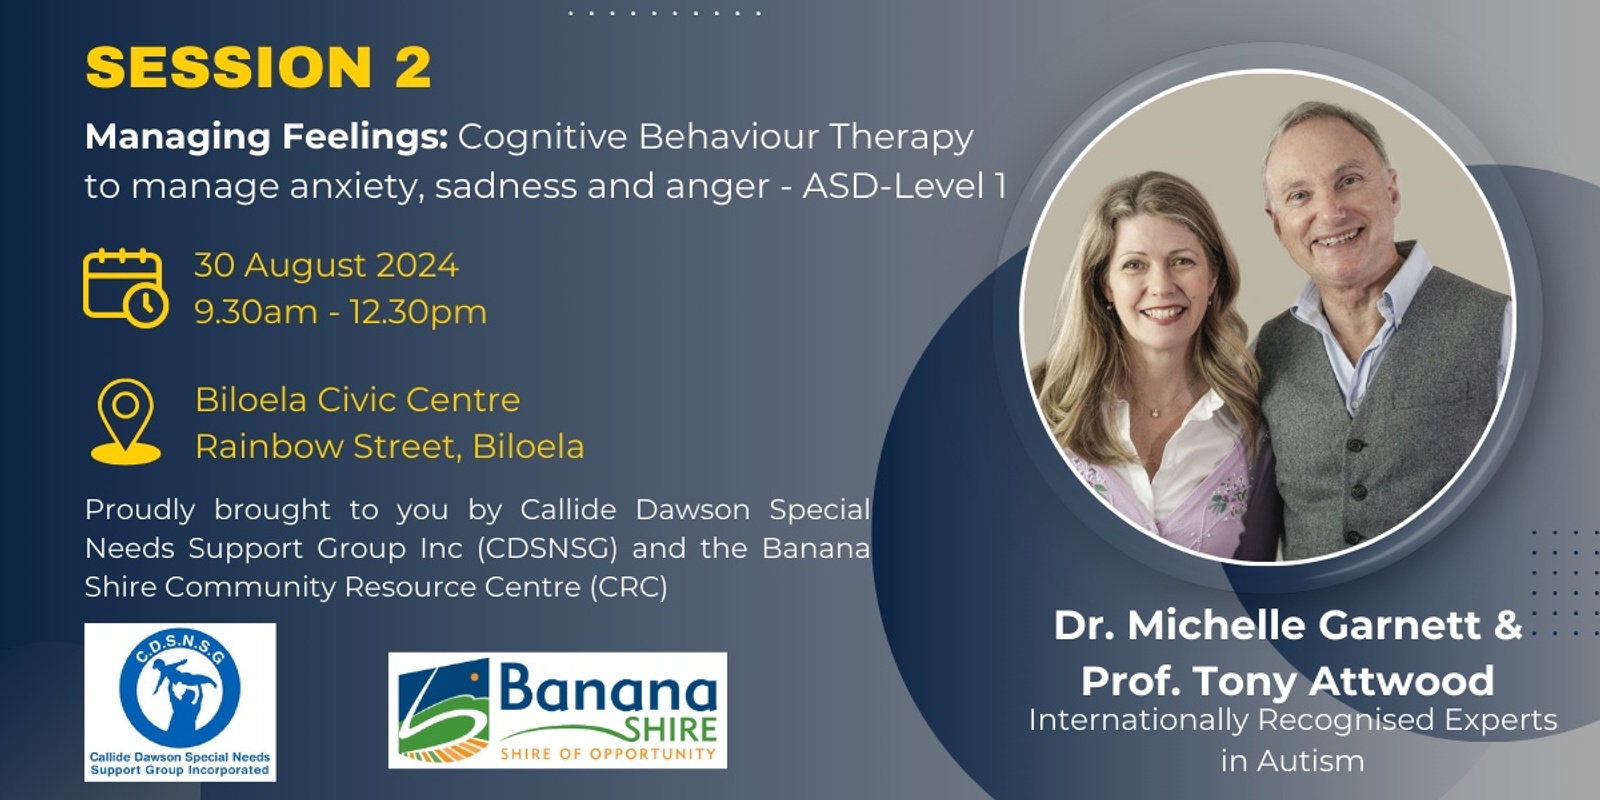 Banner image for Attwood & Garnett - Session 2 - Managing Feelings: Cognitive Behaviour Therapy to manage anxiety, sadness and anger